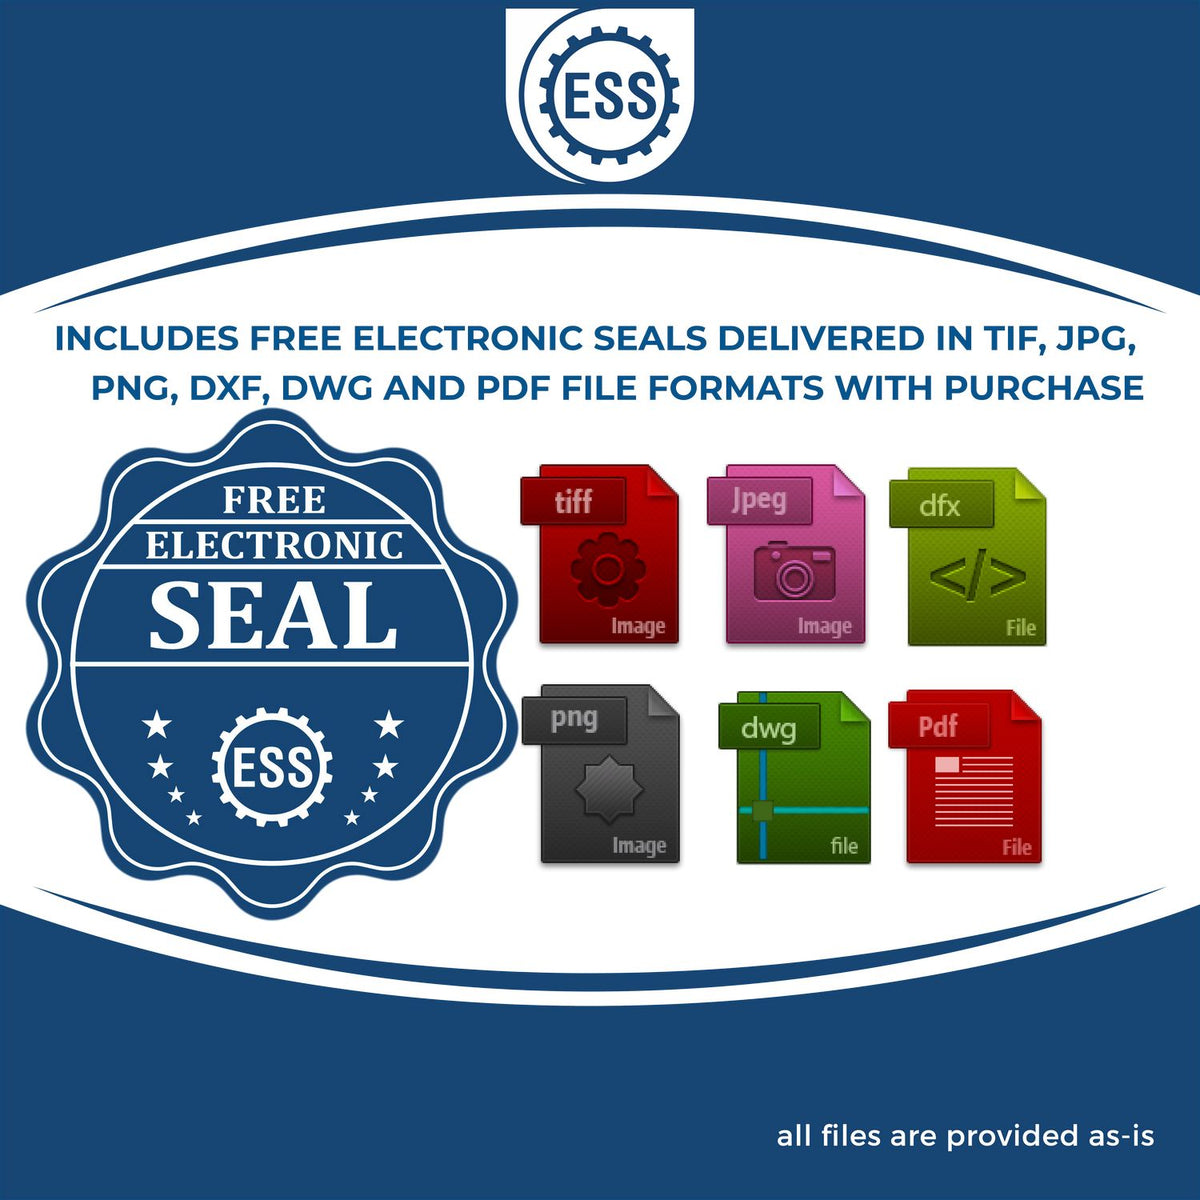 An infographic for the free electronic seal for the State of Indiana Long Reach Architectural Embossing Seal illustrating the different file type icons such as DXF, DWG, TIF, JPG and PNG.